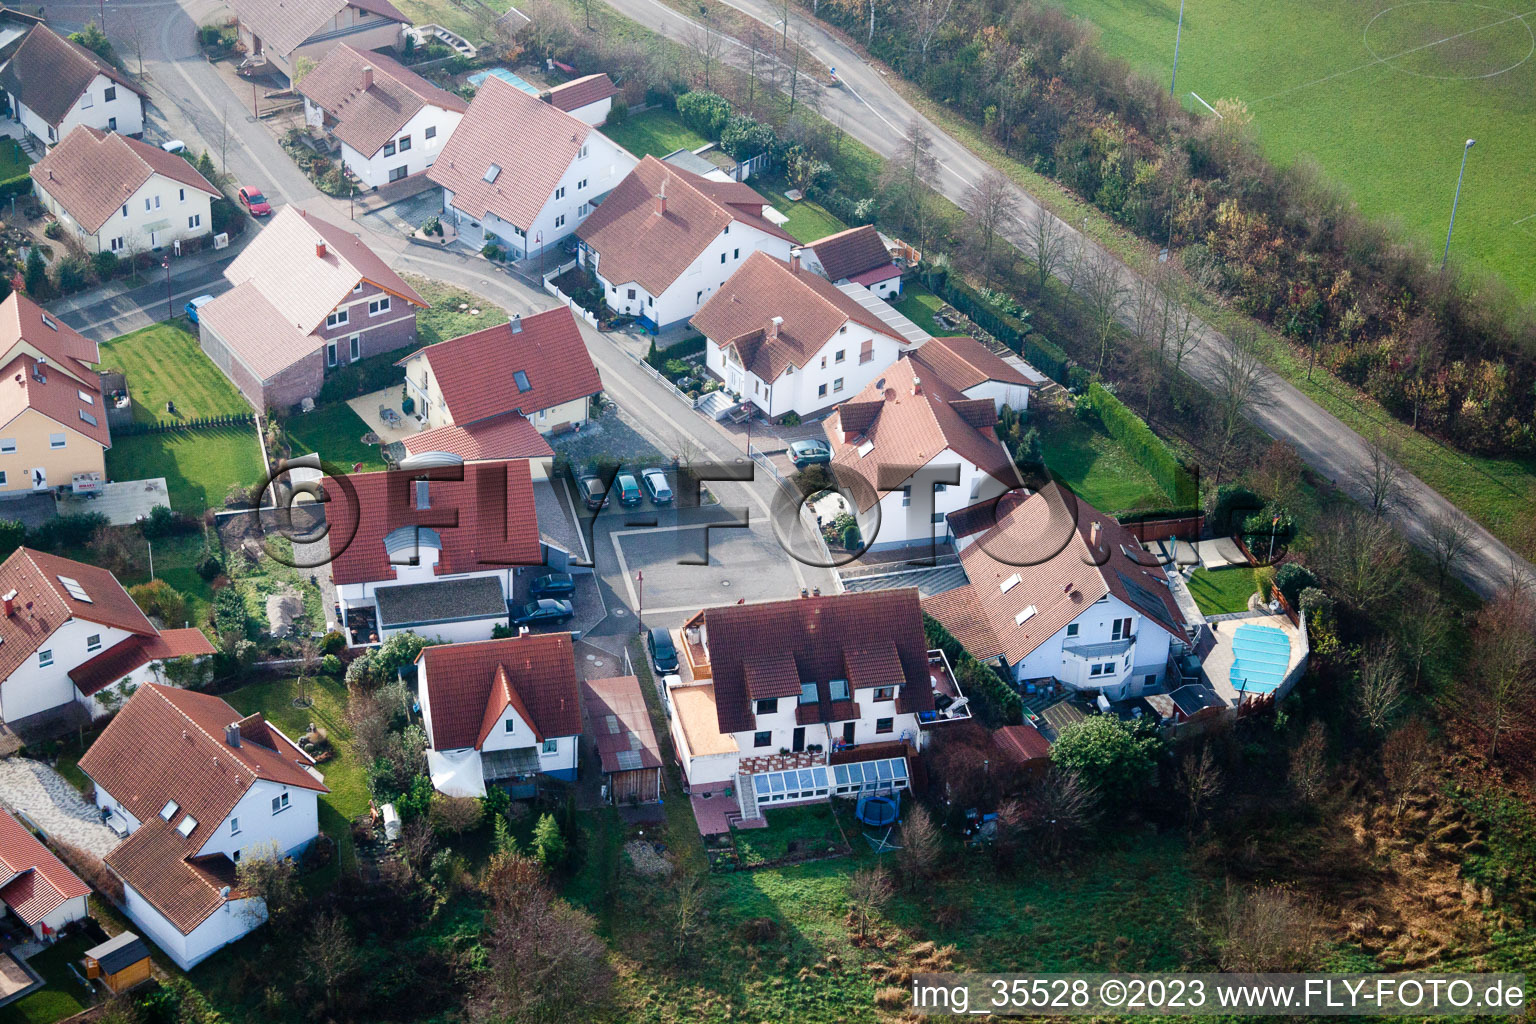 Aerial photograpy of New development area in Winden in the state Rhineland-Palatinate, Germany